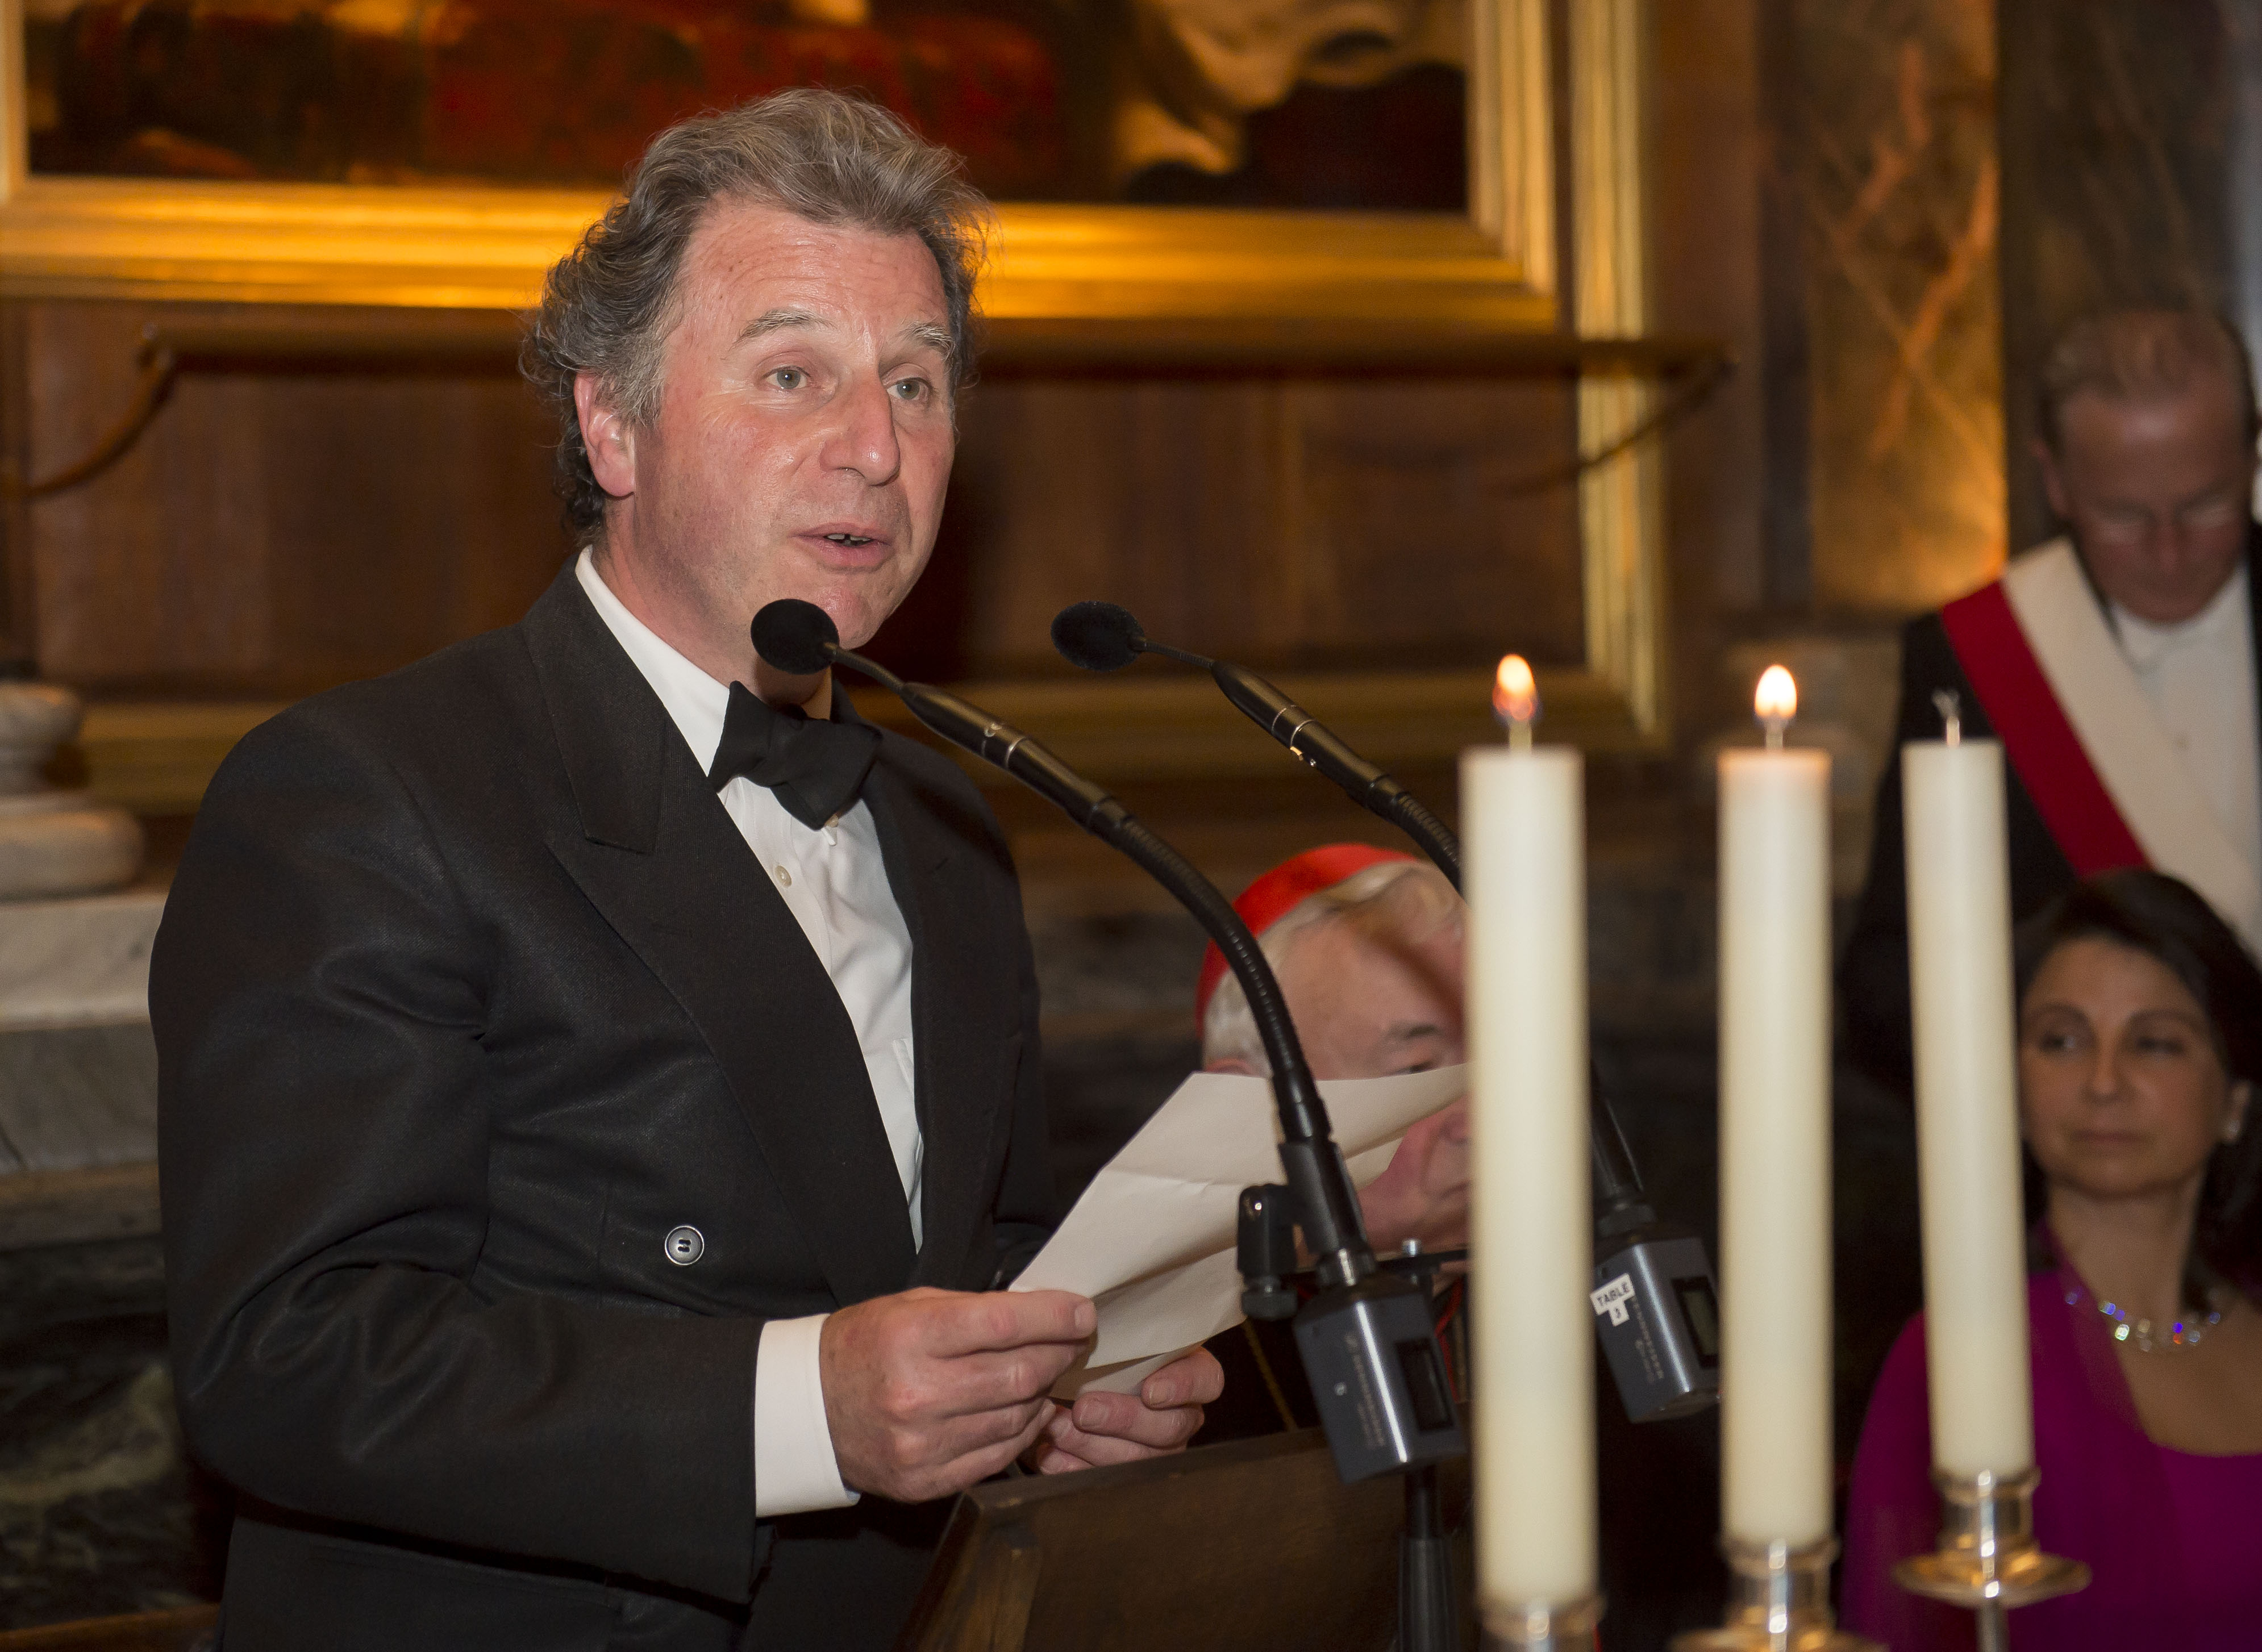 Image ©Licensed to i-Images Picture Agency. 24/05/2016. London, United Kingdom. Drapers' Hall Banquet. A banquet at Drapers' Hall, London, to mark the historical pilgrimage of the relics of saint and martyr Thomas A Beckett. Picture by David Mirzoeff / i-Images